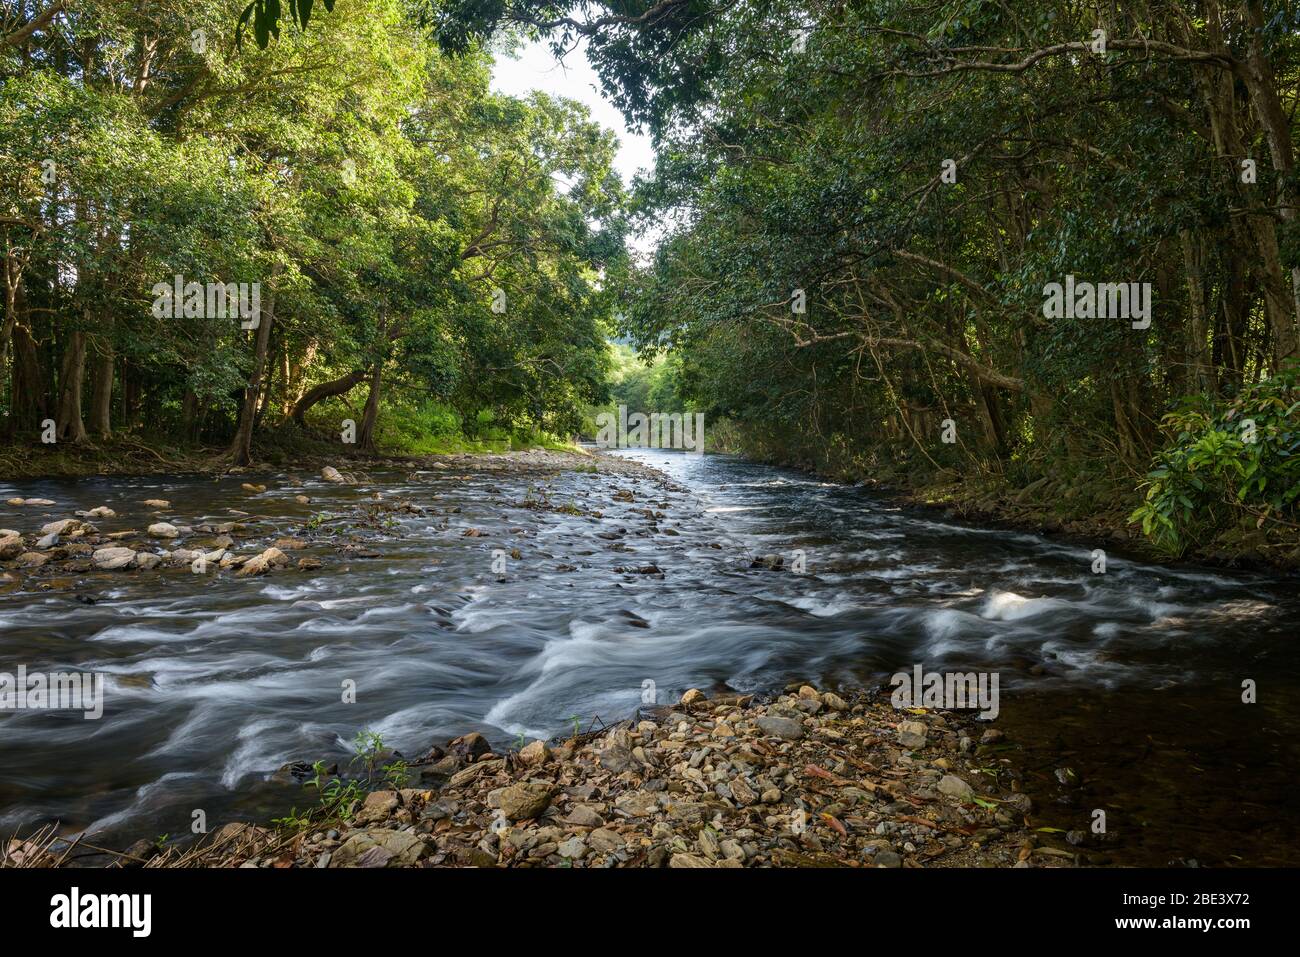 Foreground river stones separating two flowing branches of Crystal Creek flowing through the lush, tropical rainforest habitat at Redlynch in Cairns. Stock Photo